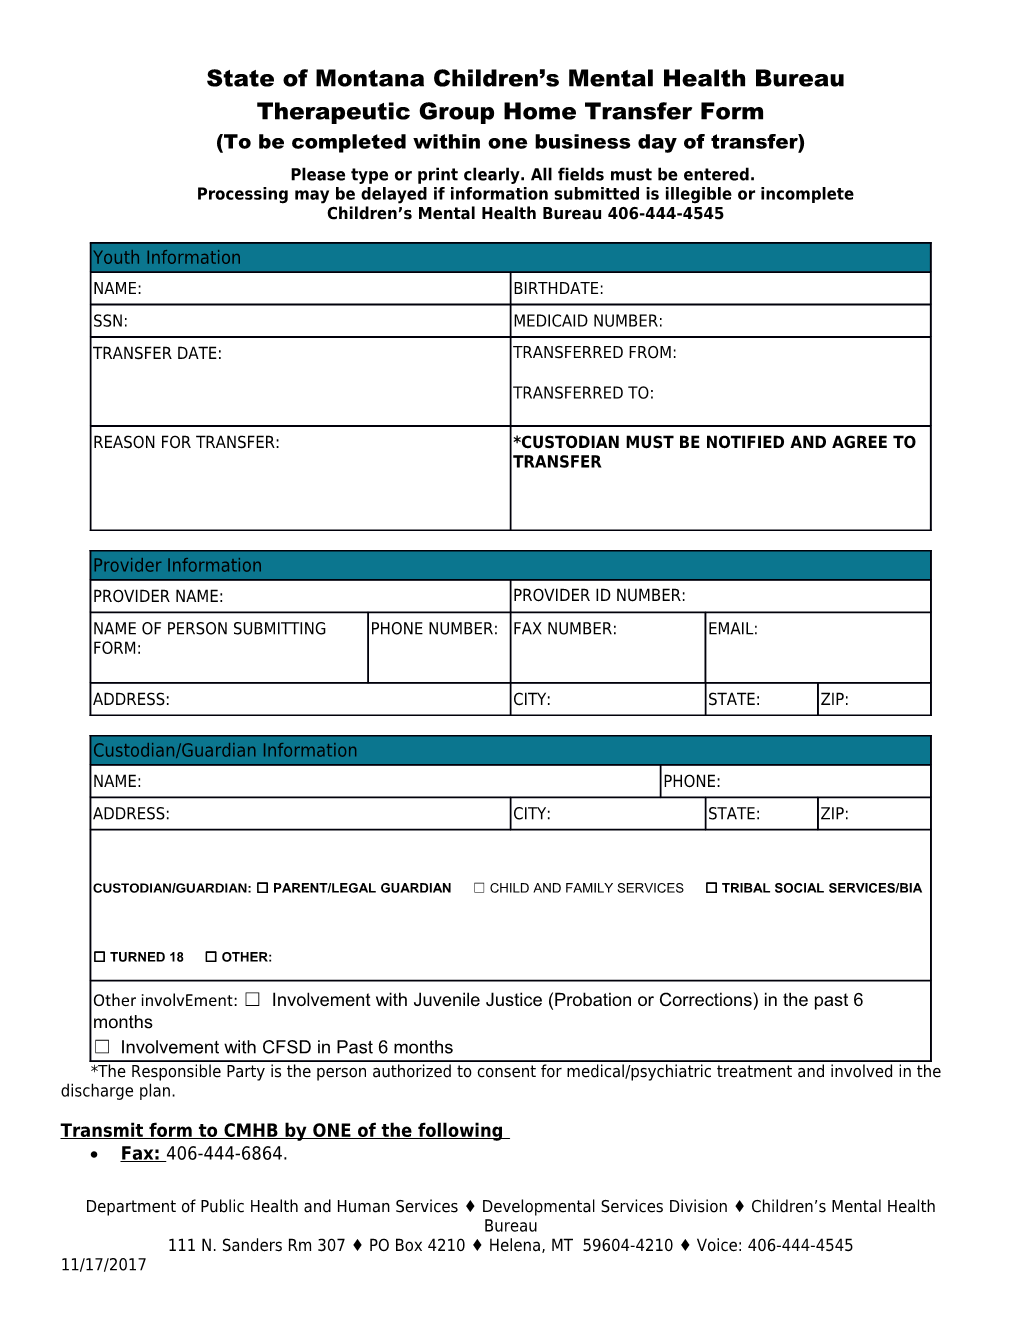 Therapeutic Group Home Transfer Form